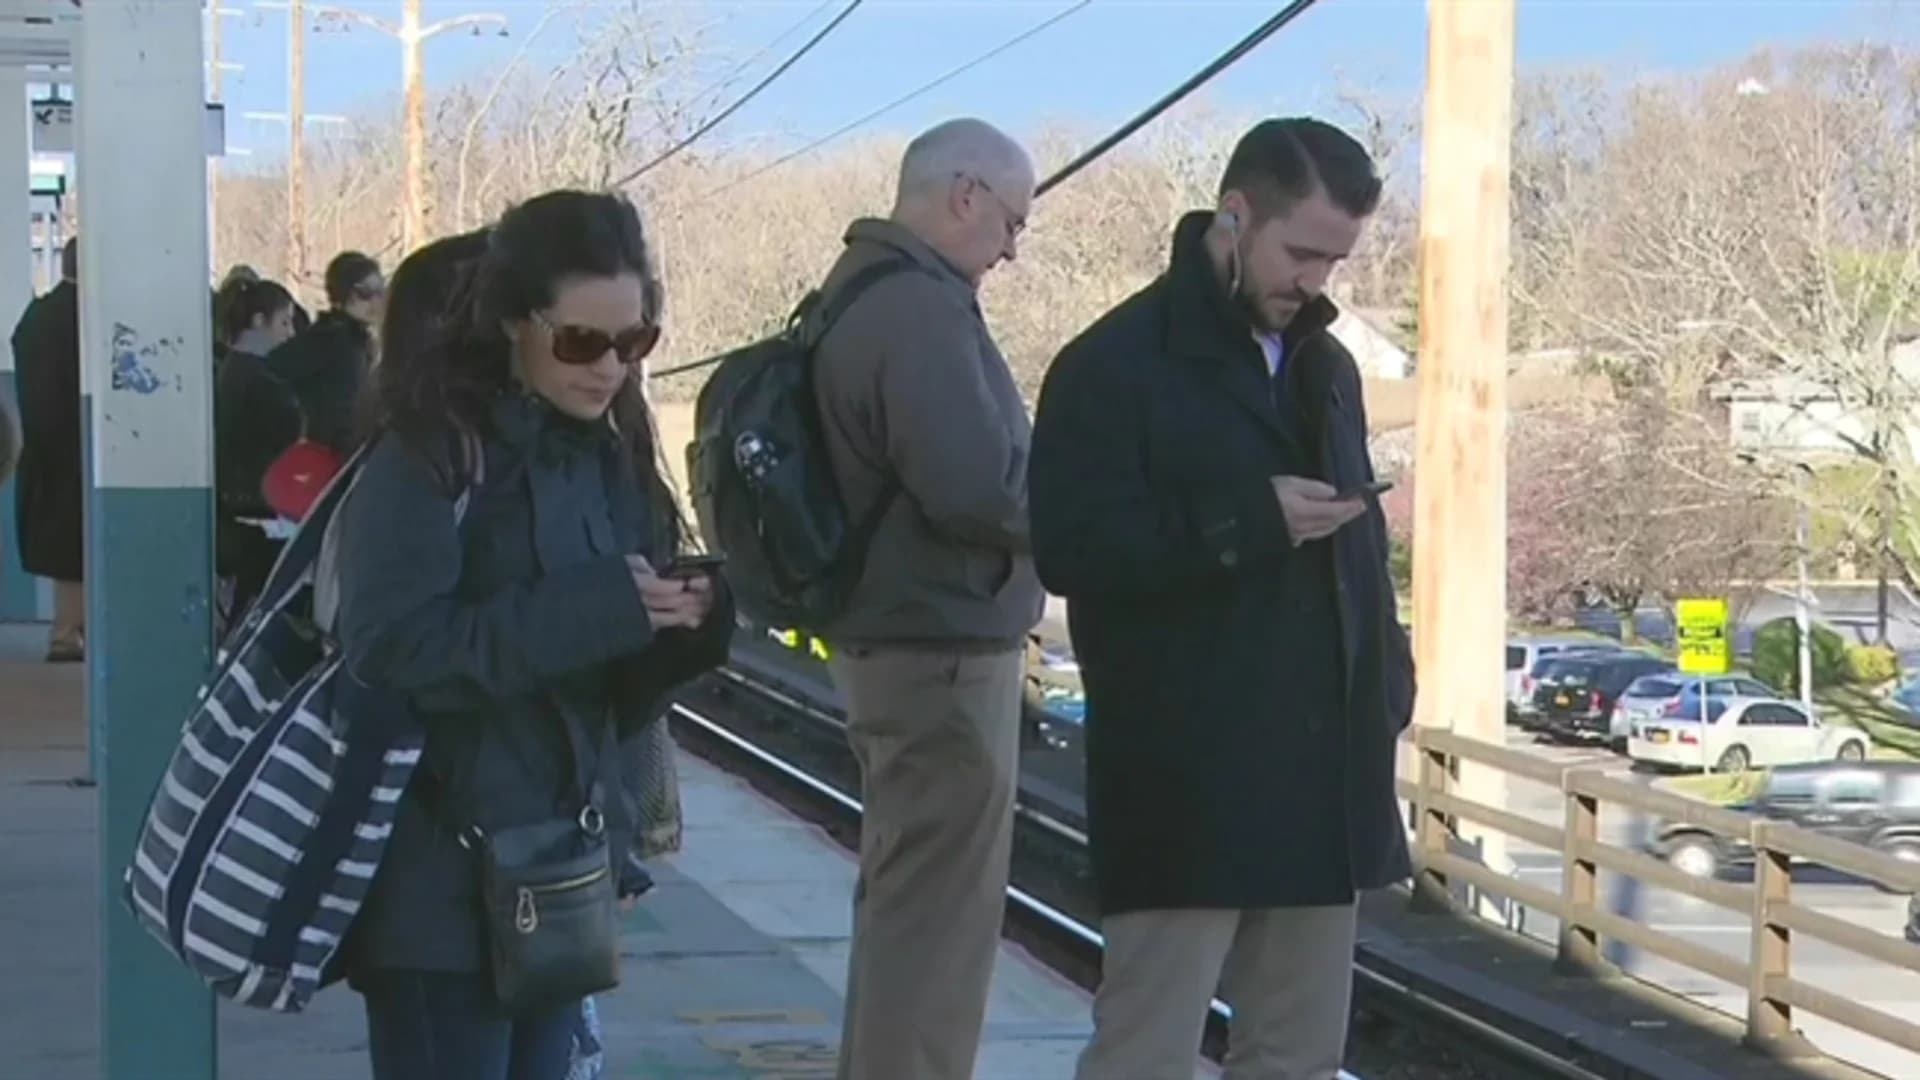 LIRR back to normal after days of cancellations, disruptions